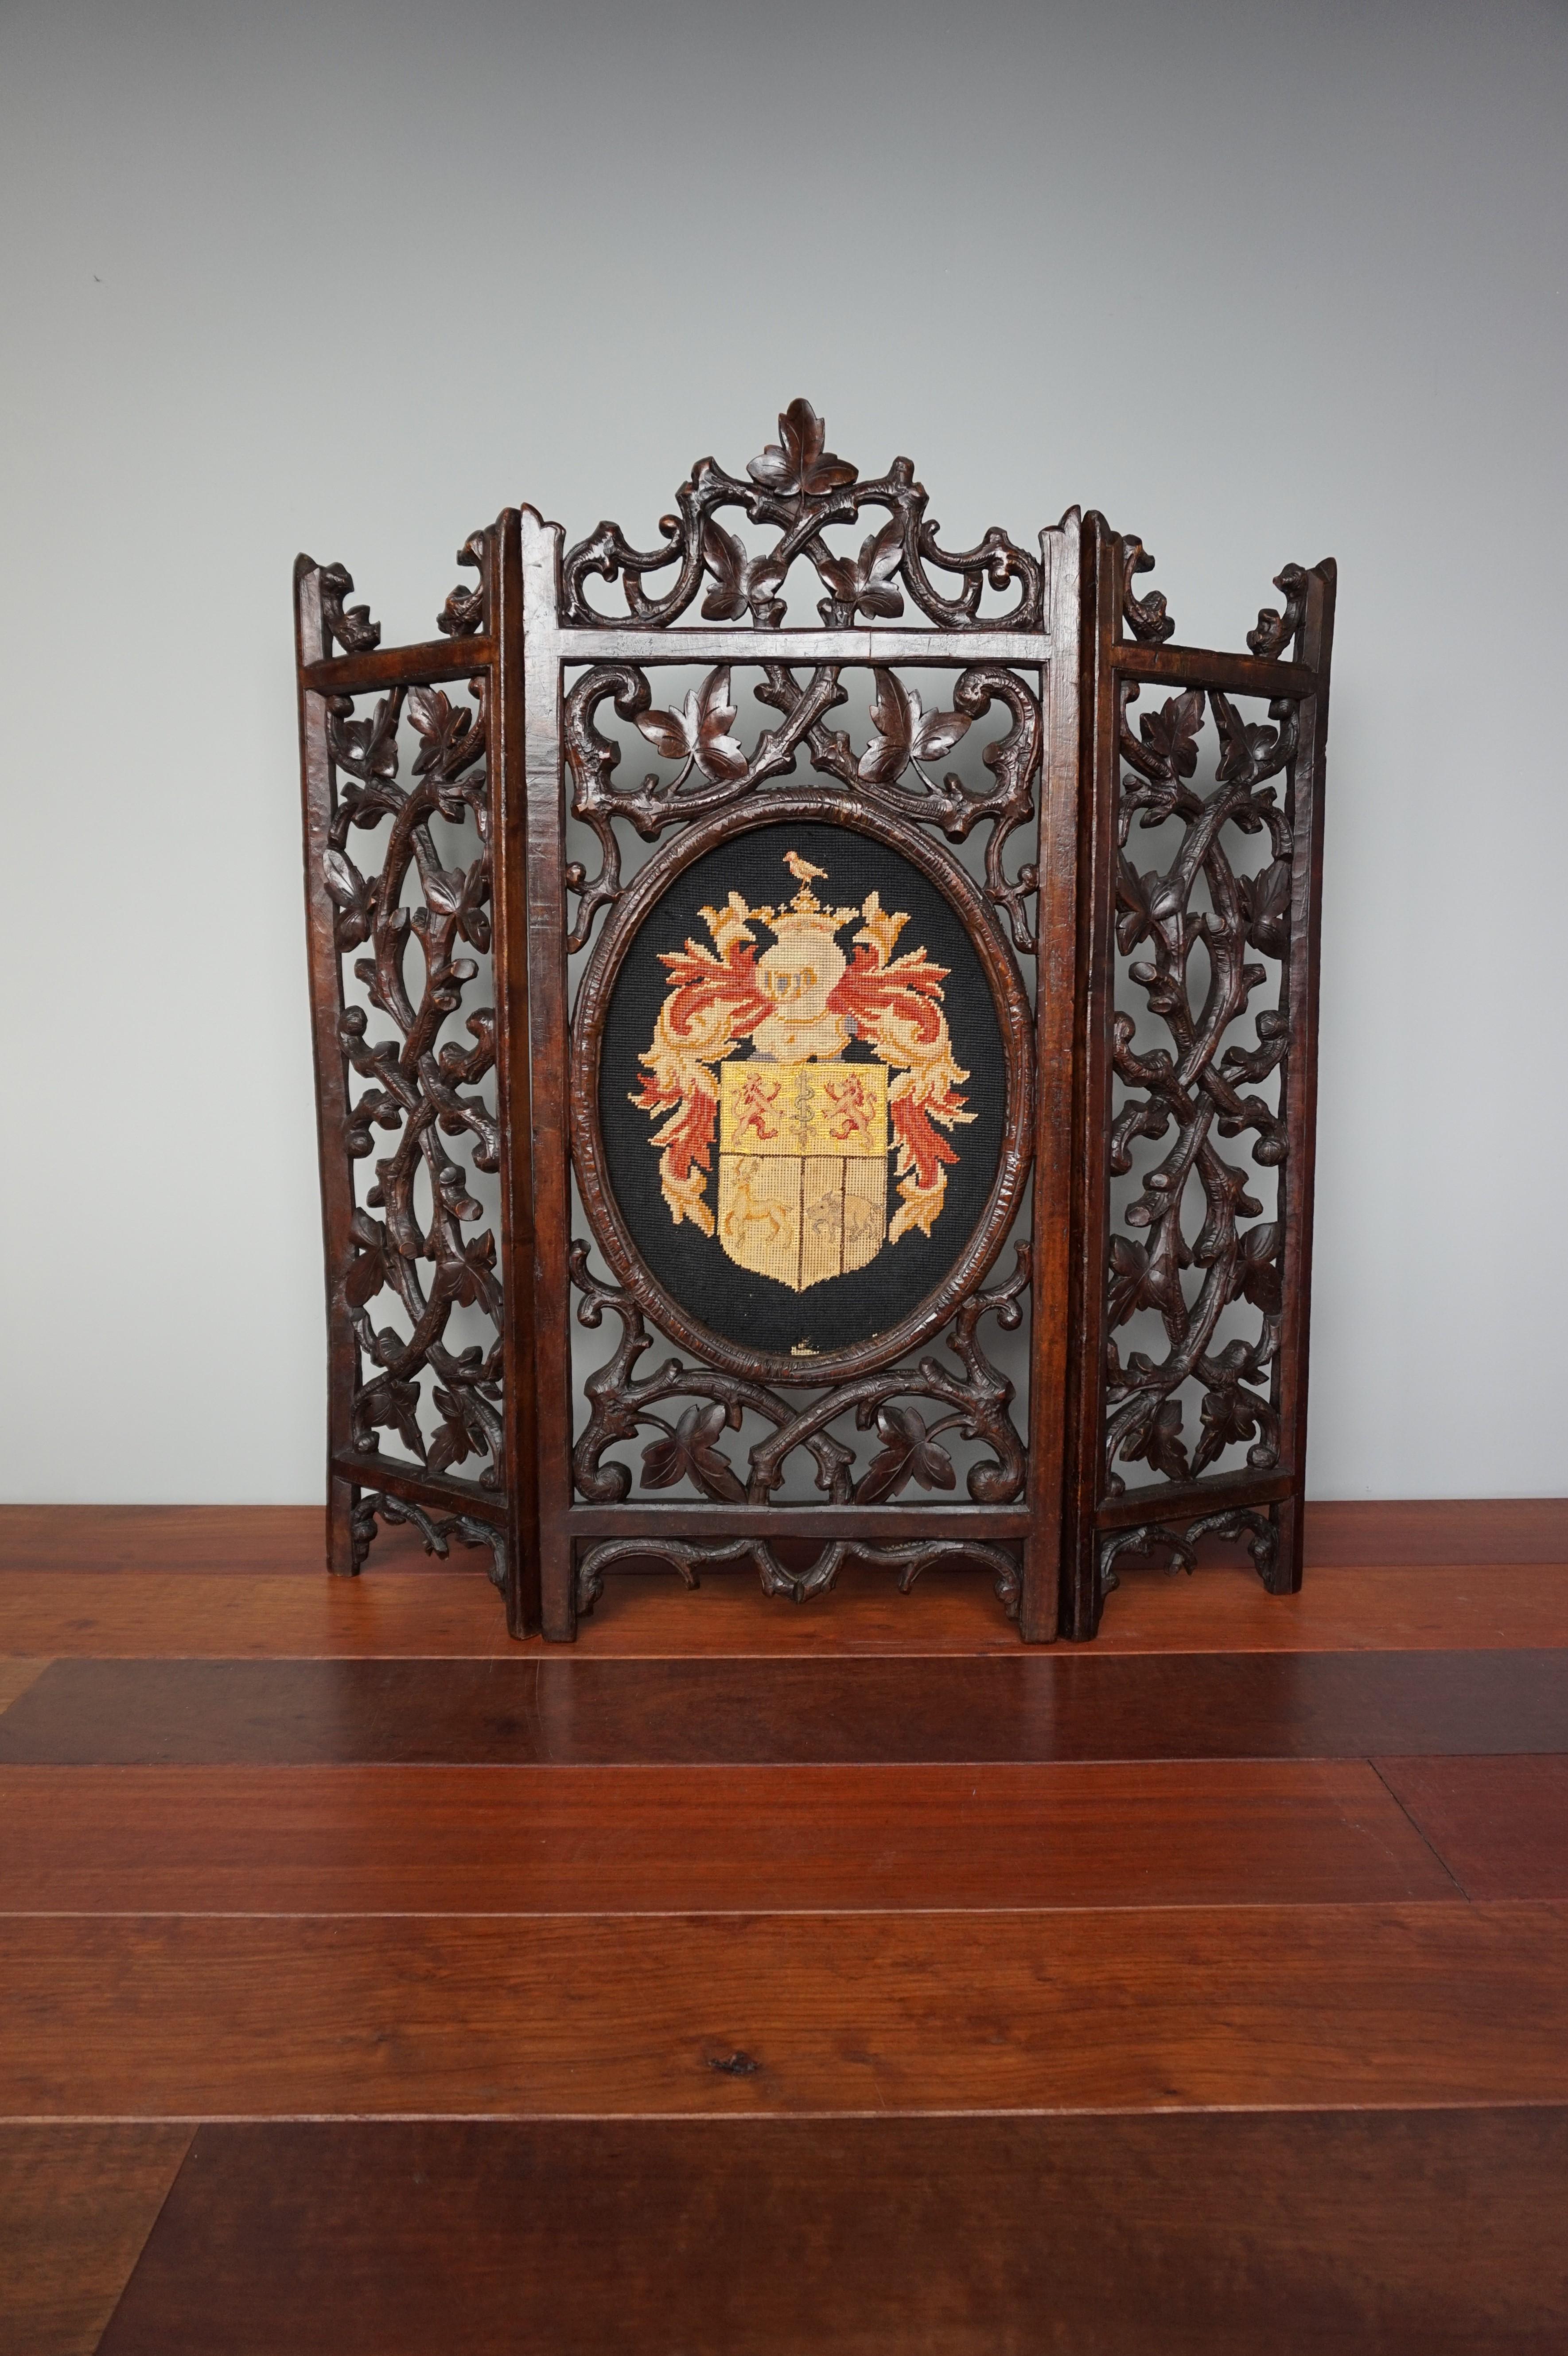 Beautifully handcrafted antique Black Forest fireplace screen.

This beautifully hand carved antique from the late 1800s currently is the only Black Forest firescreen for sale anywhere. It certainly is the only one on 1stdibs and to have been able